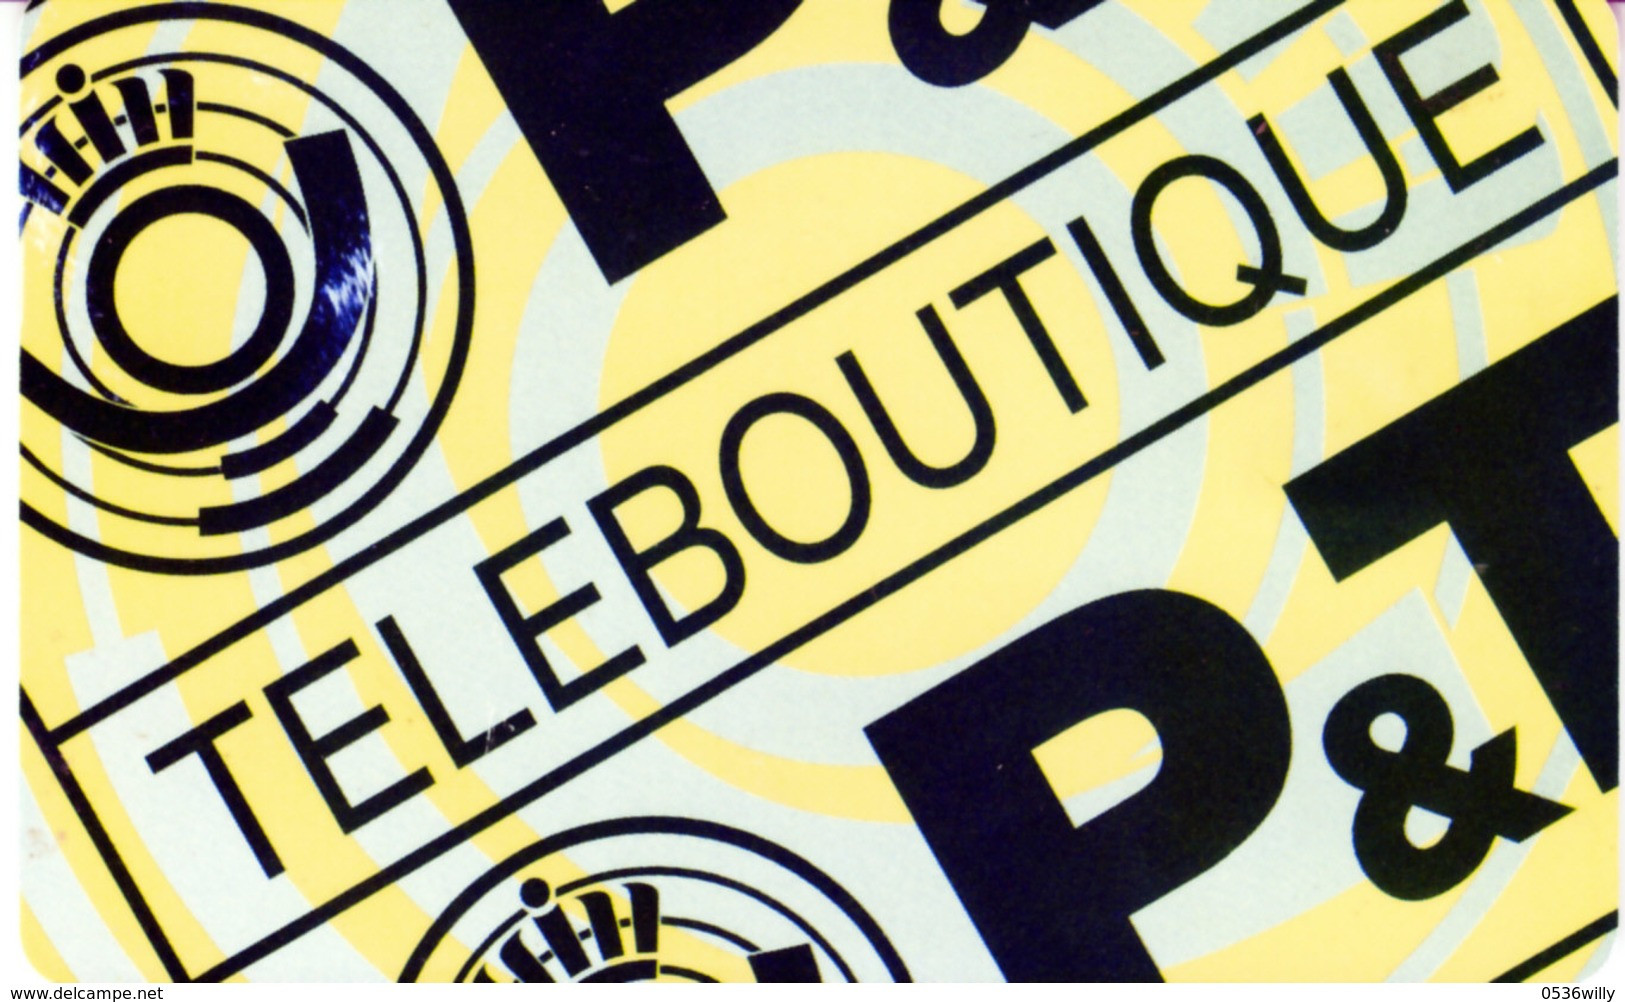 Phonecard "TELEBOUTIQUE", 120 Units (T.102) - Luxembourg